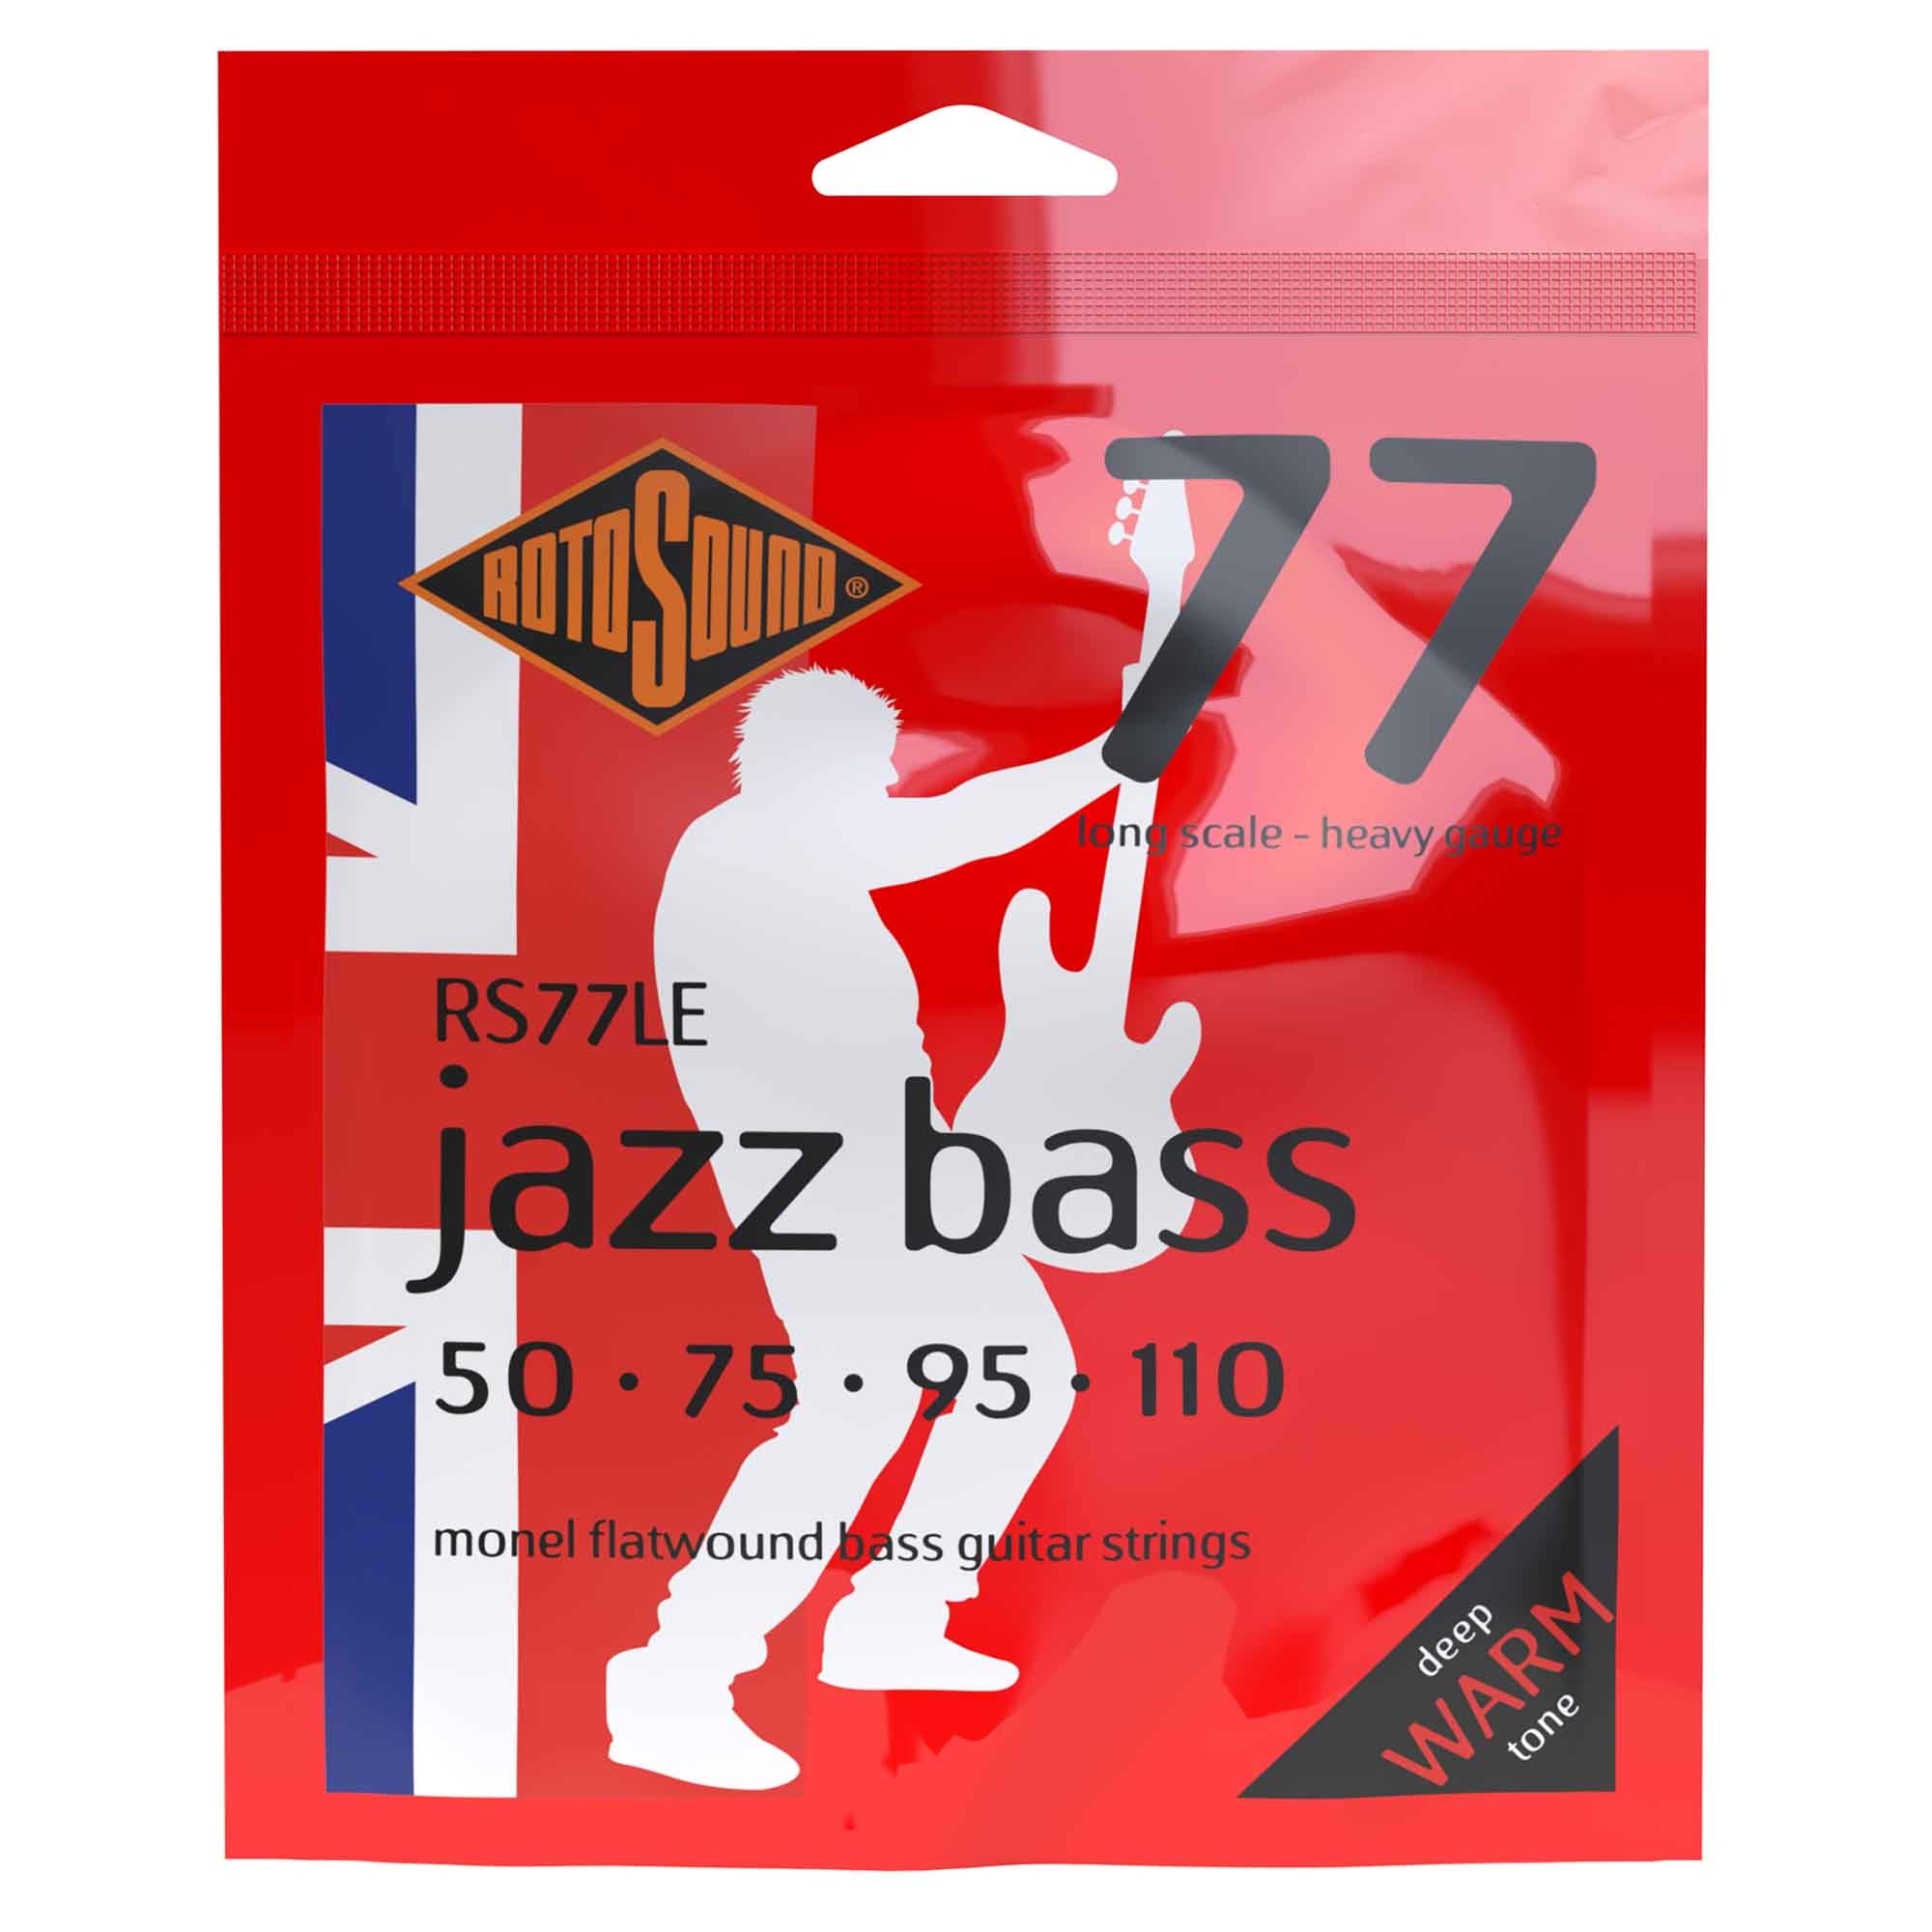 Rotosound Jazz Bass RS77LE Flatwound Bass Strings 50-110 Monel